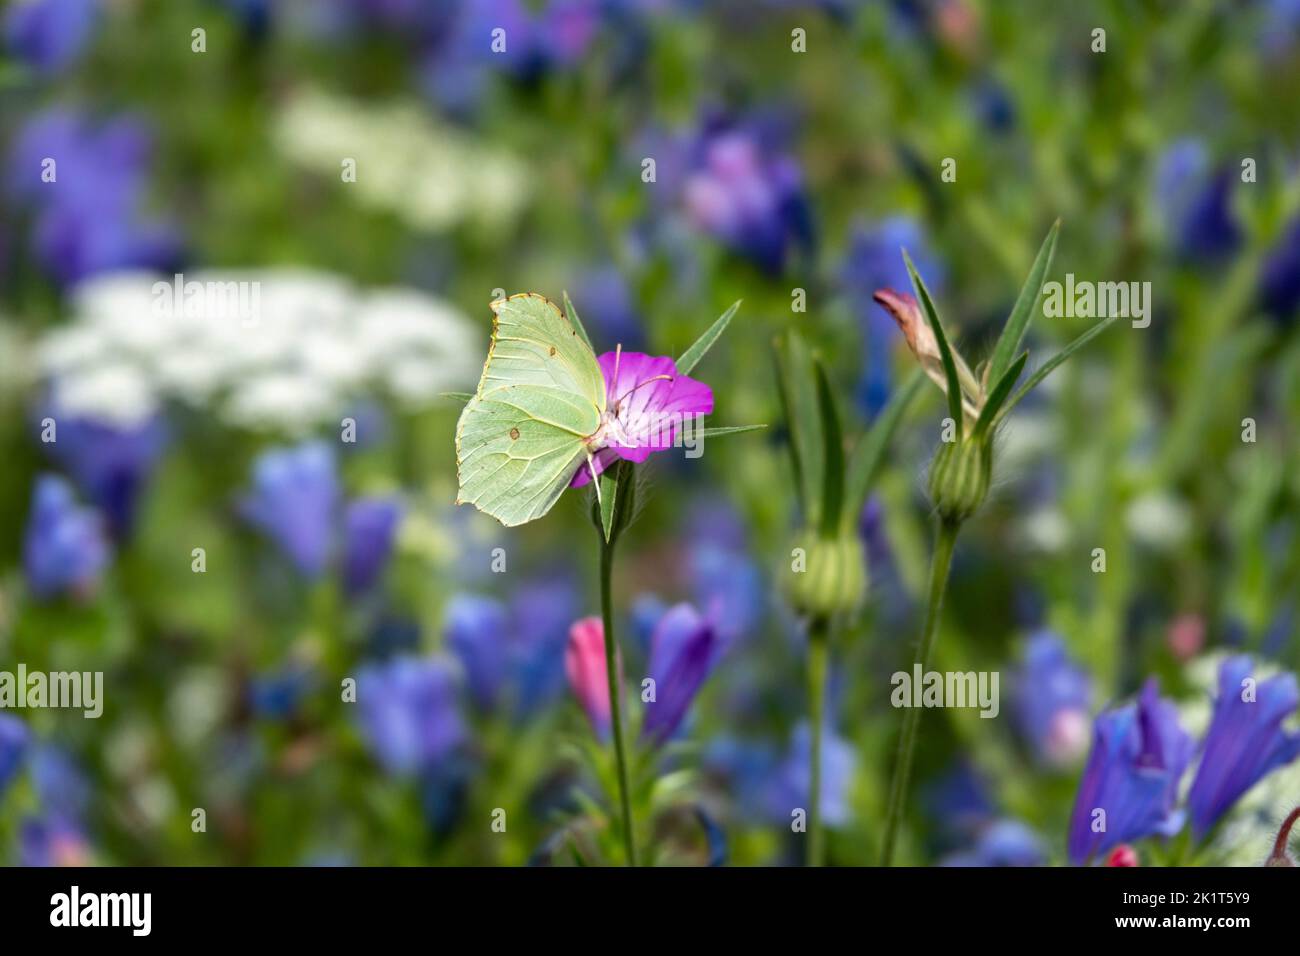 Common brimstone butterfly on bright pink corncockle with a blurred background of pretty wildflowers Stock Photo